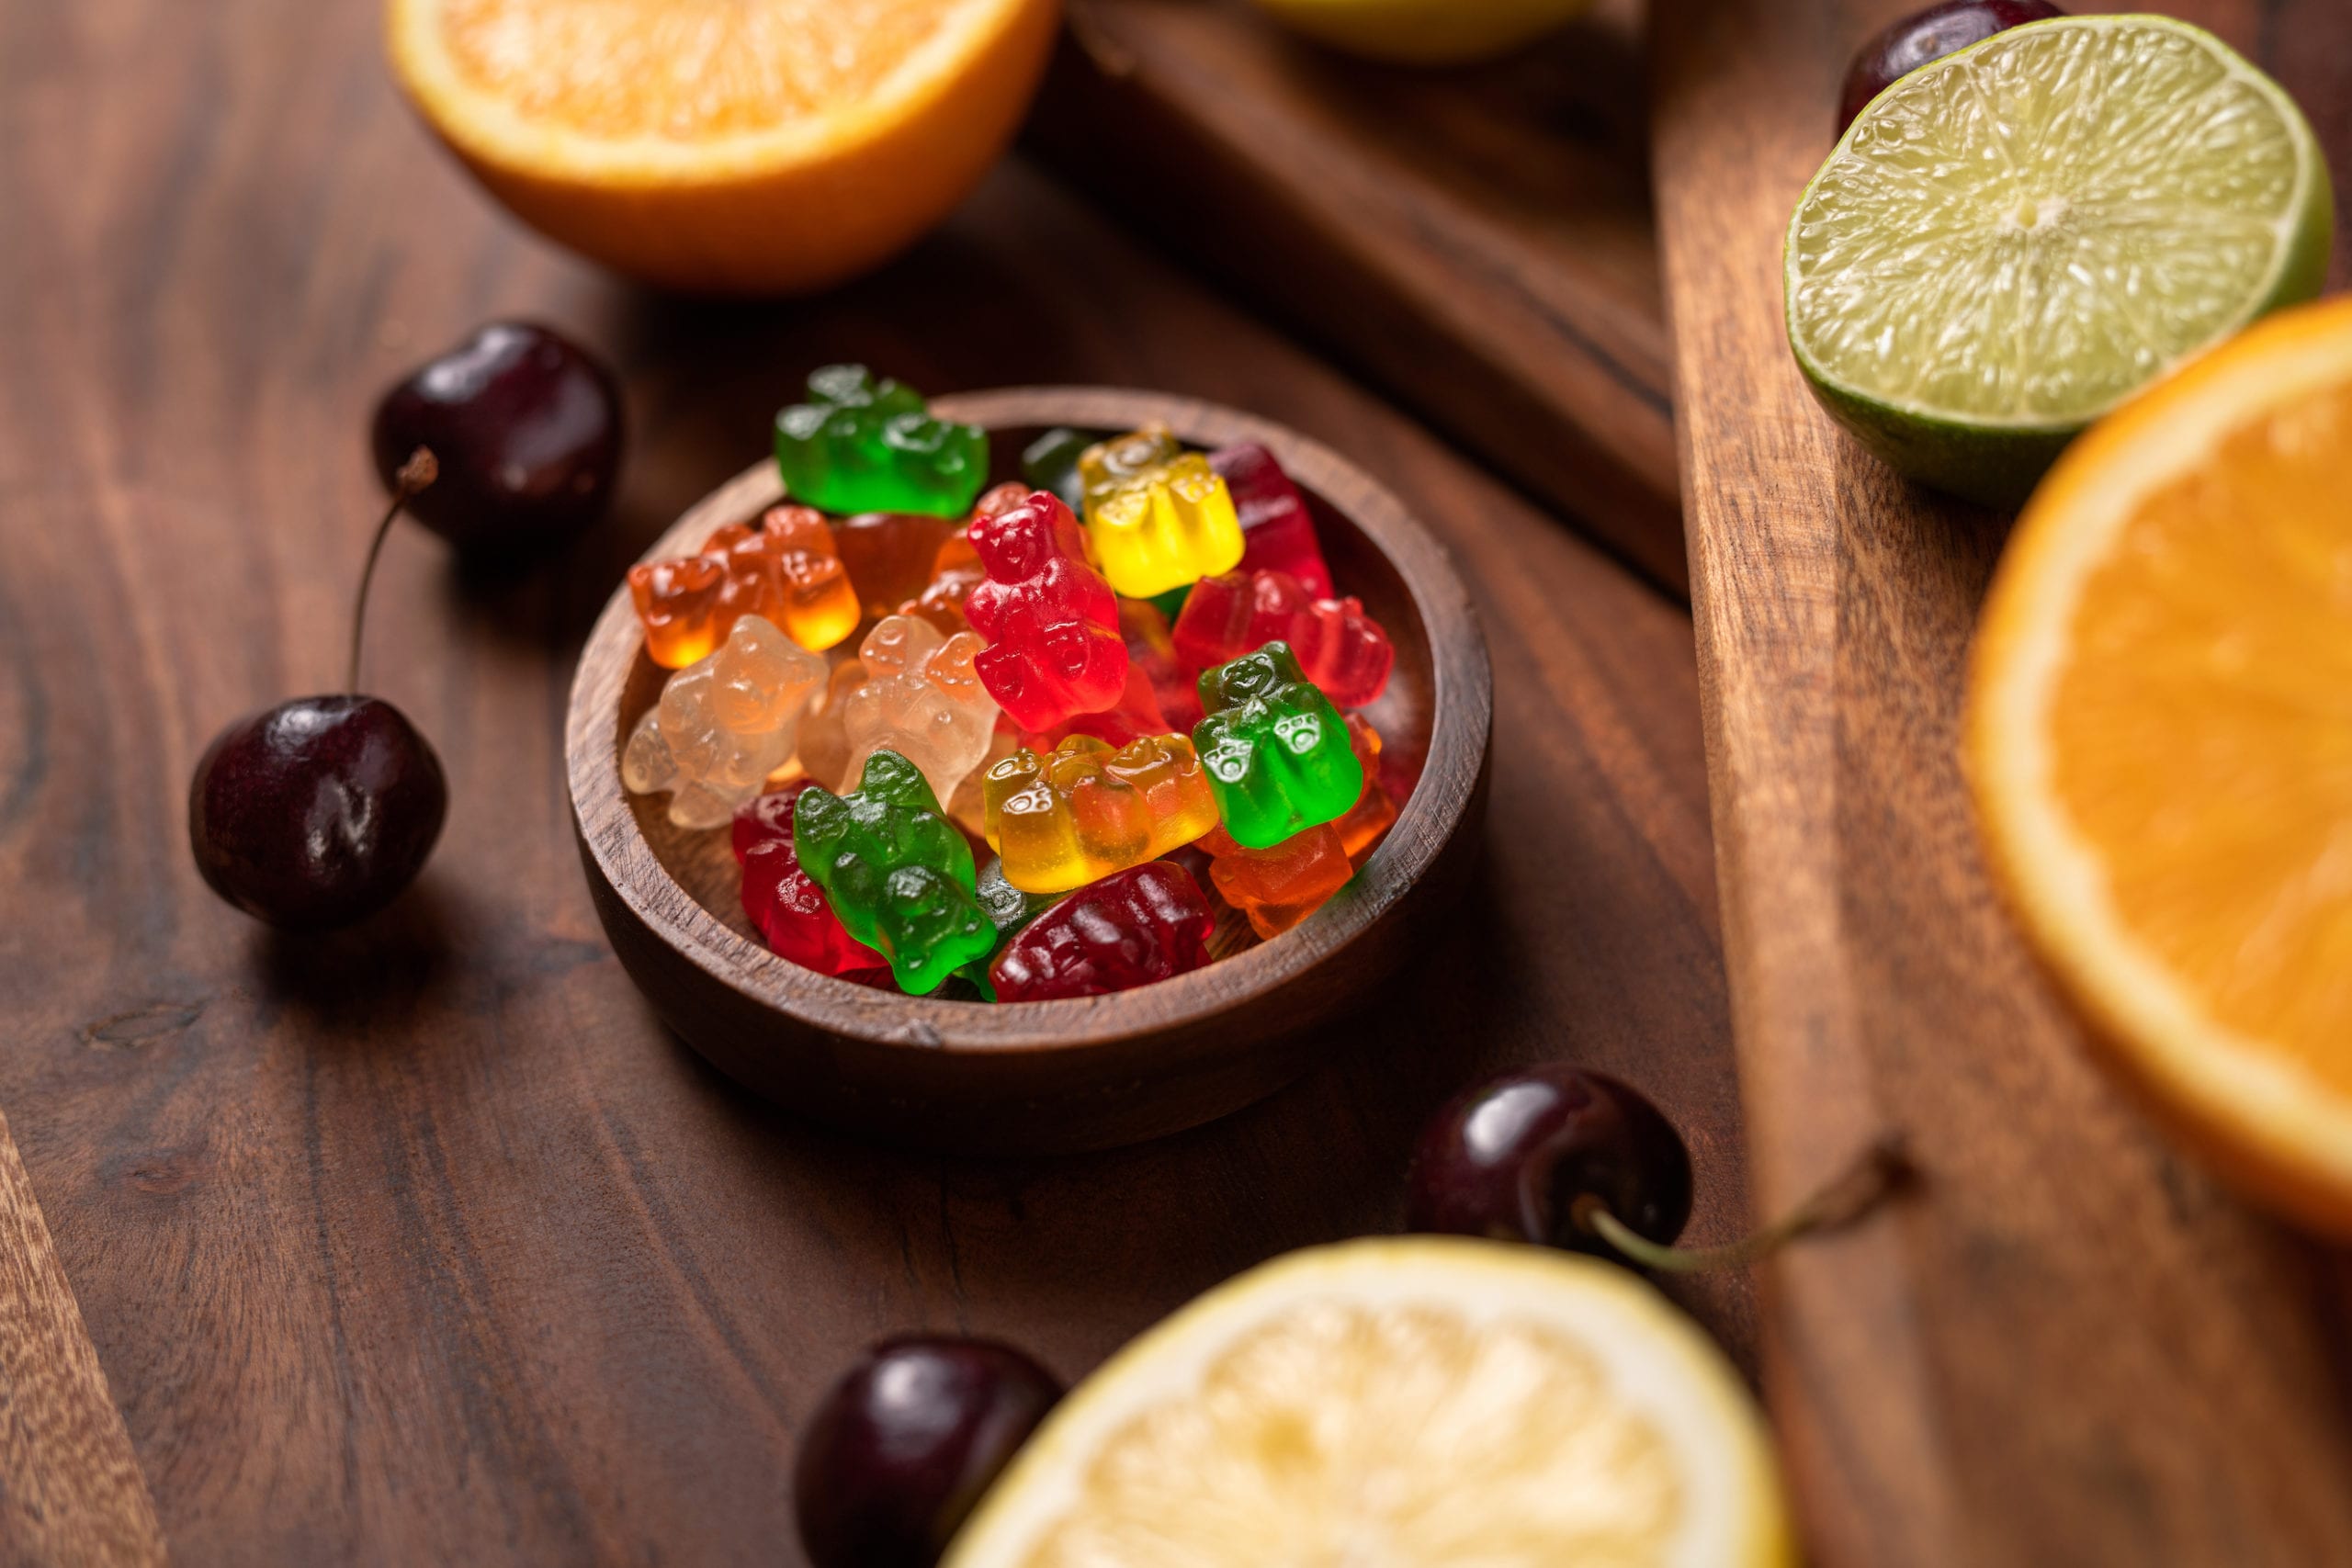 JustCBD Product Photography and Just CBD Products gummy bears on display surrounded by cherries and slices of citrus fruit